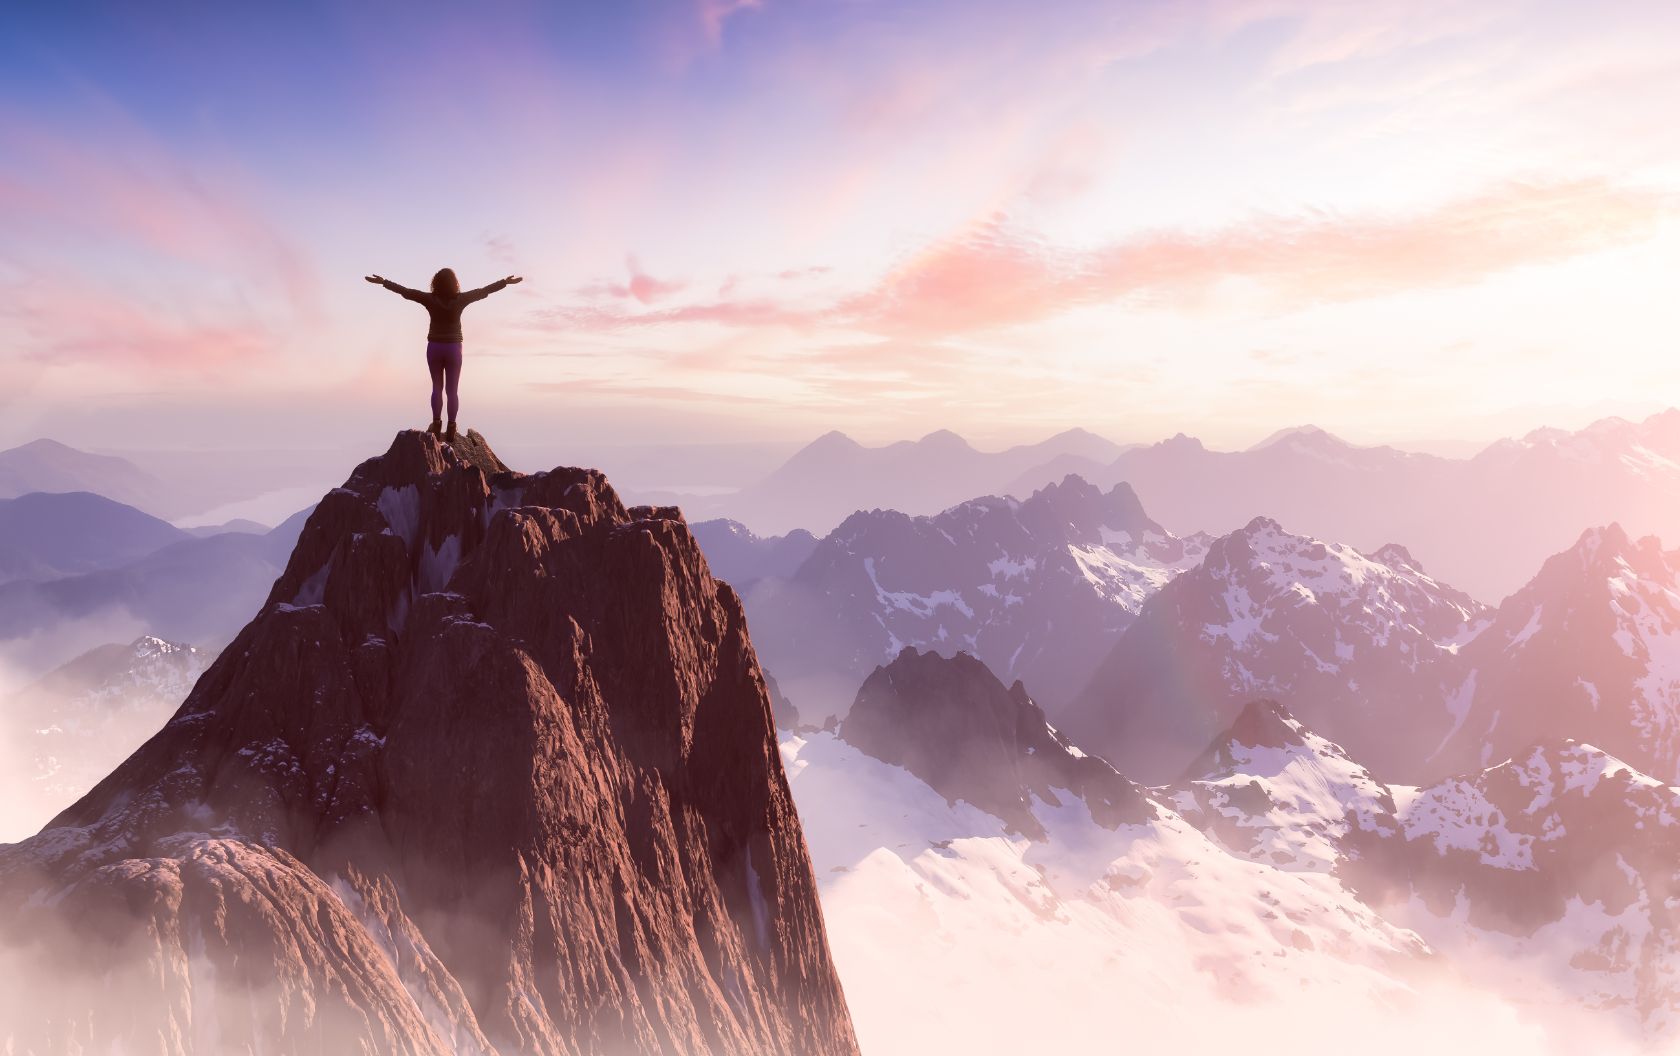 A business woman having scaled many challenges to reach the peak of a mountain overlooking a mountain range at sunrise with her arms out wide, ready to overcome challenges for her business with inbound marketing.